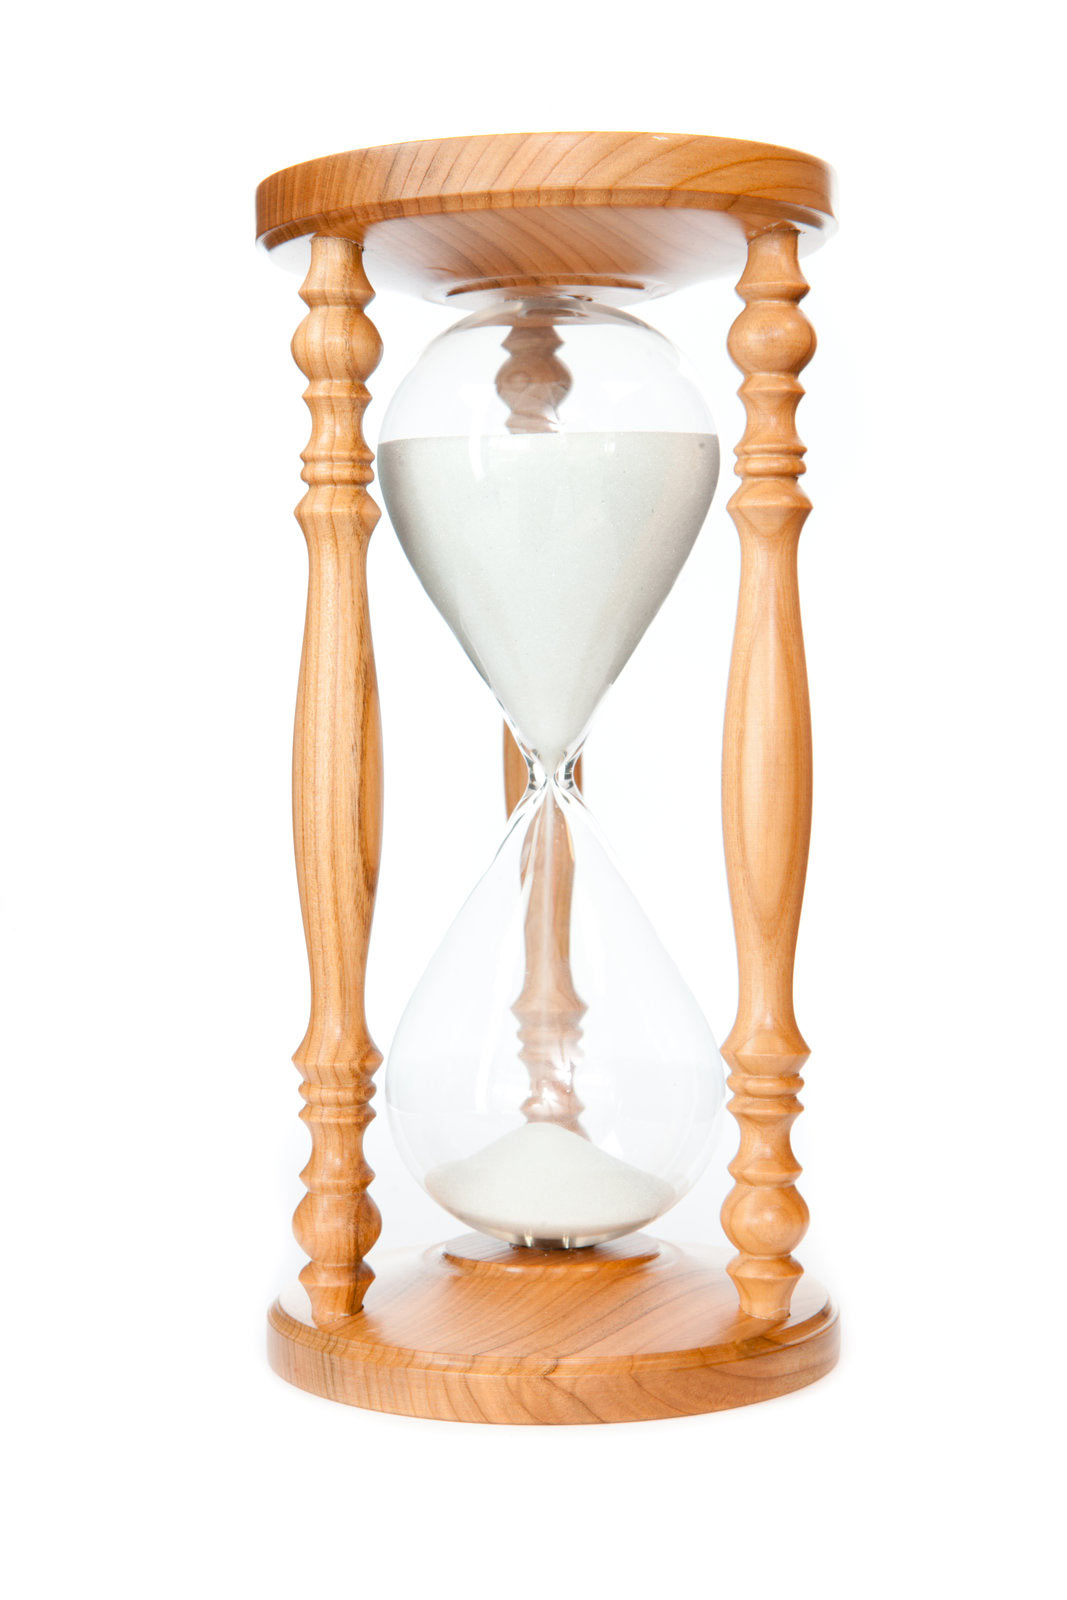 An hourglass with sand falling through measuring the time it takes to make money once we start our blogs.